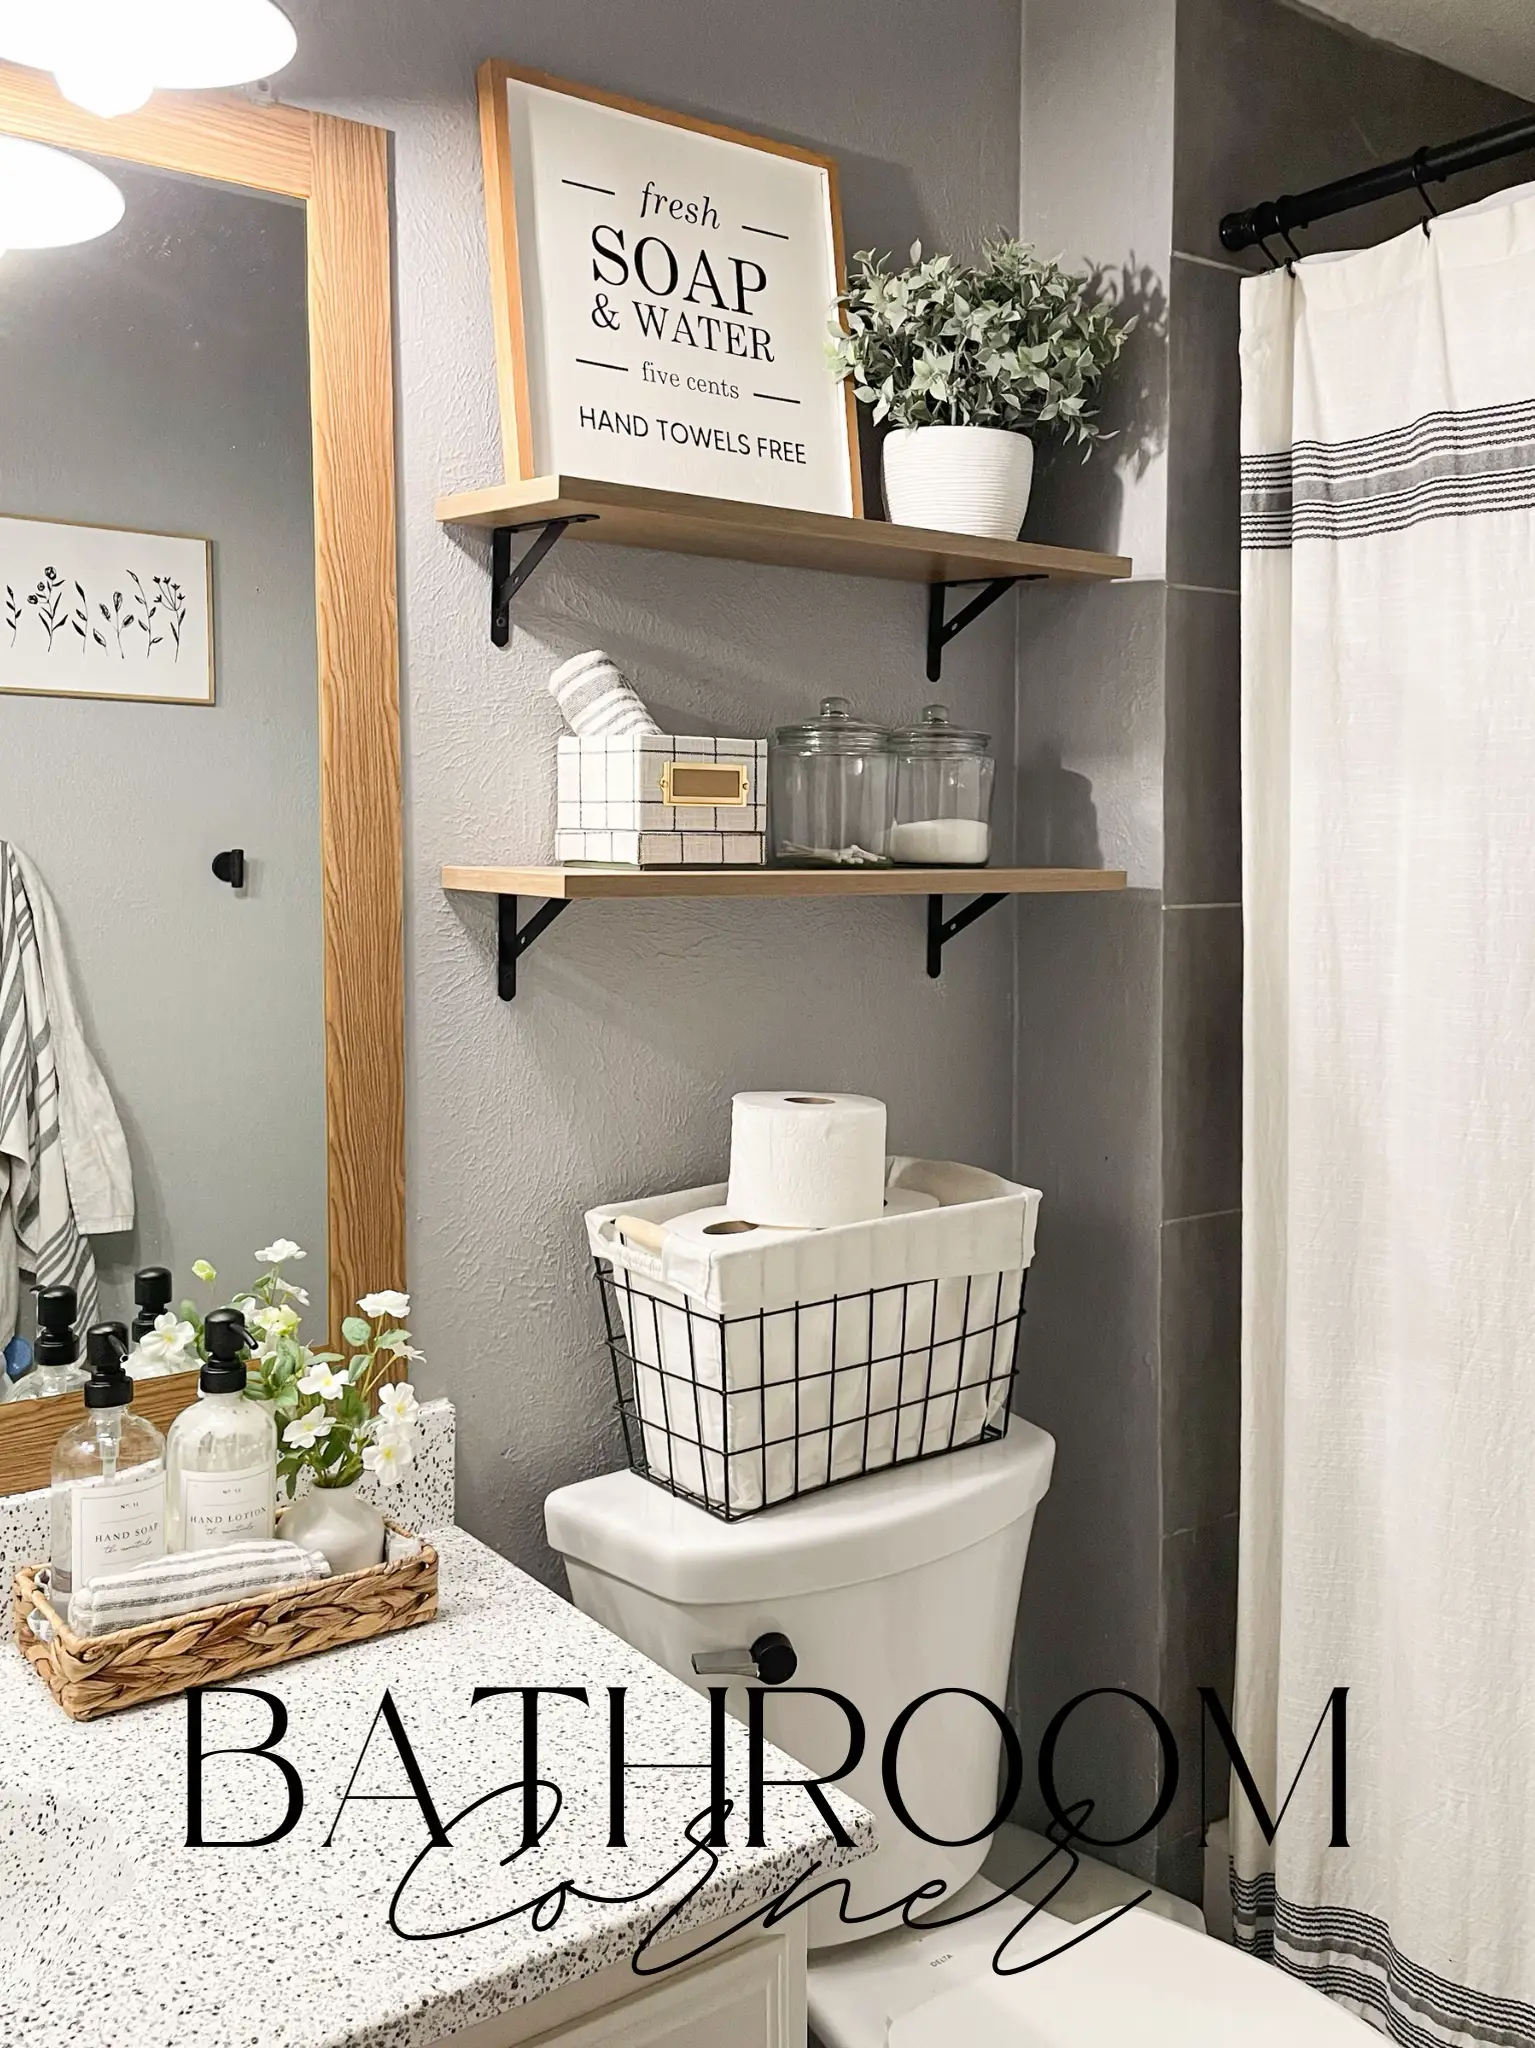 31 Inspiring Bathroom Shelf Decor Ideas: Personalizing Your Space with  Style - Inyouths Blog